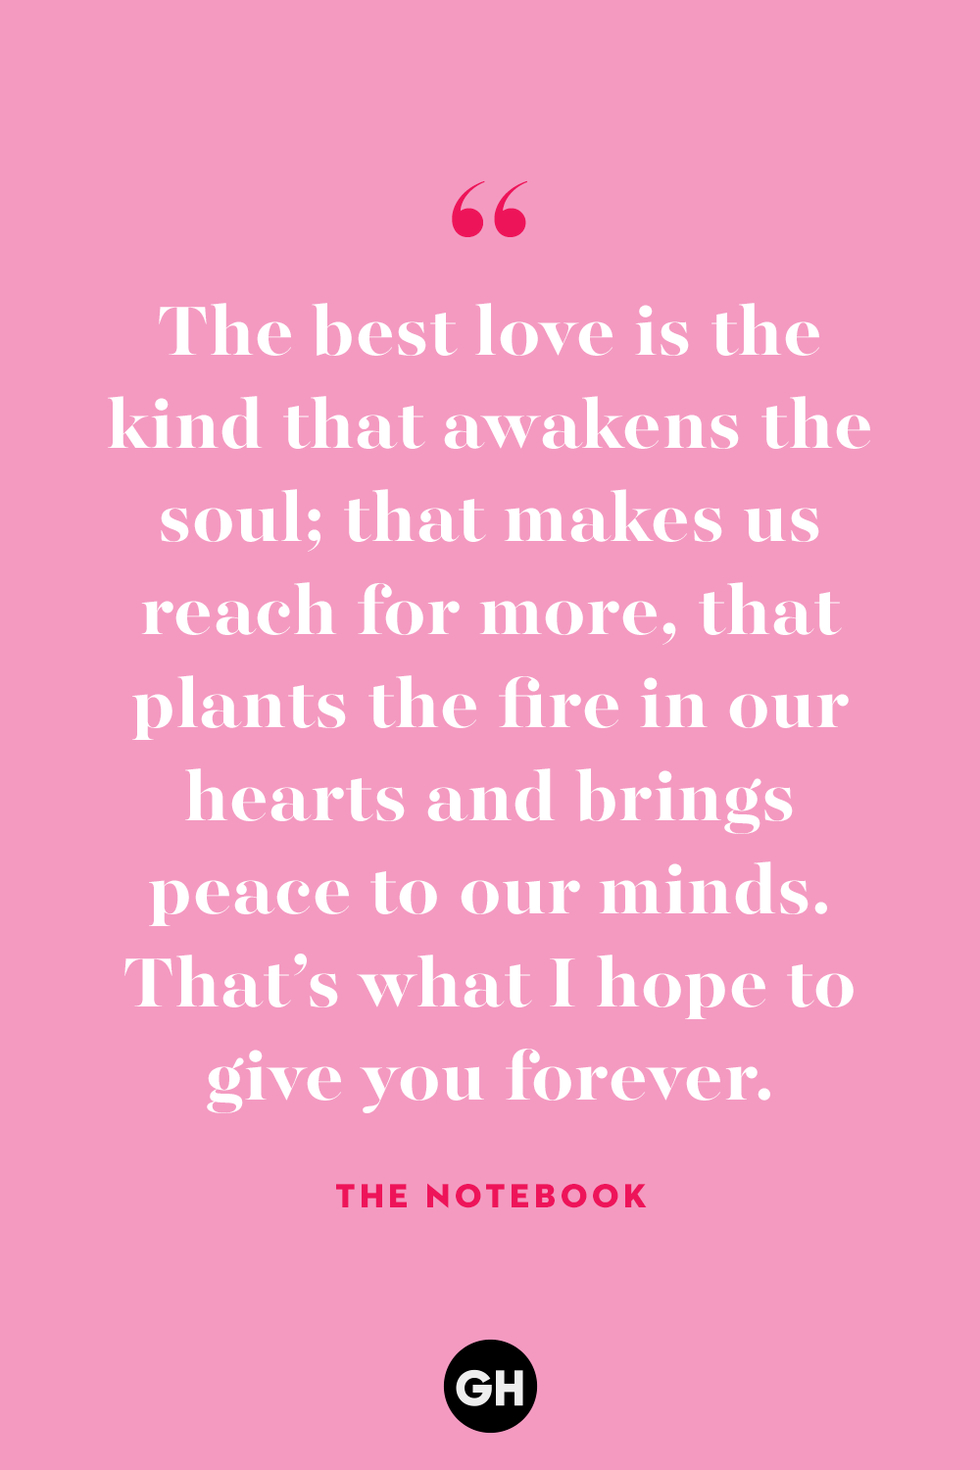 https://hips.hearstapps.com/hmg-prod/images/gh-love-quotes-19-the-notebook-1641584507.png?crop=1xw:1xh;center,top&resize=980:*